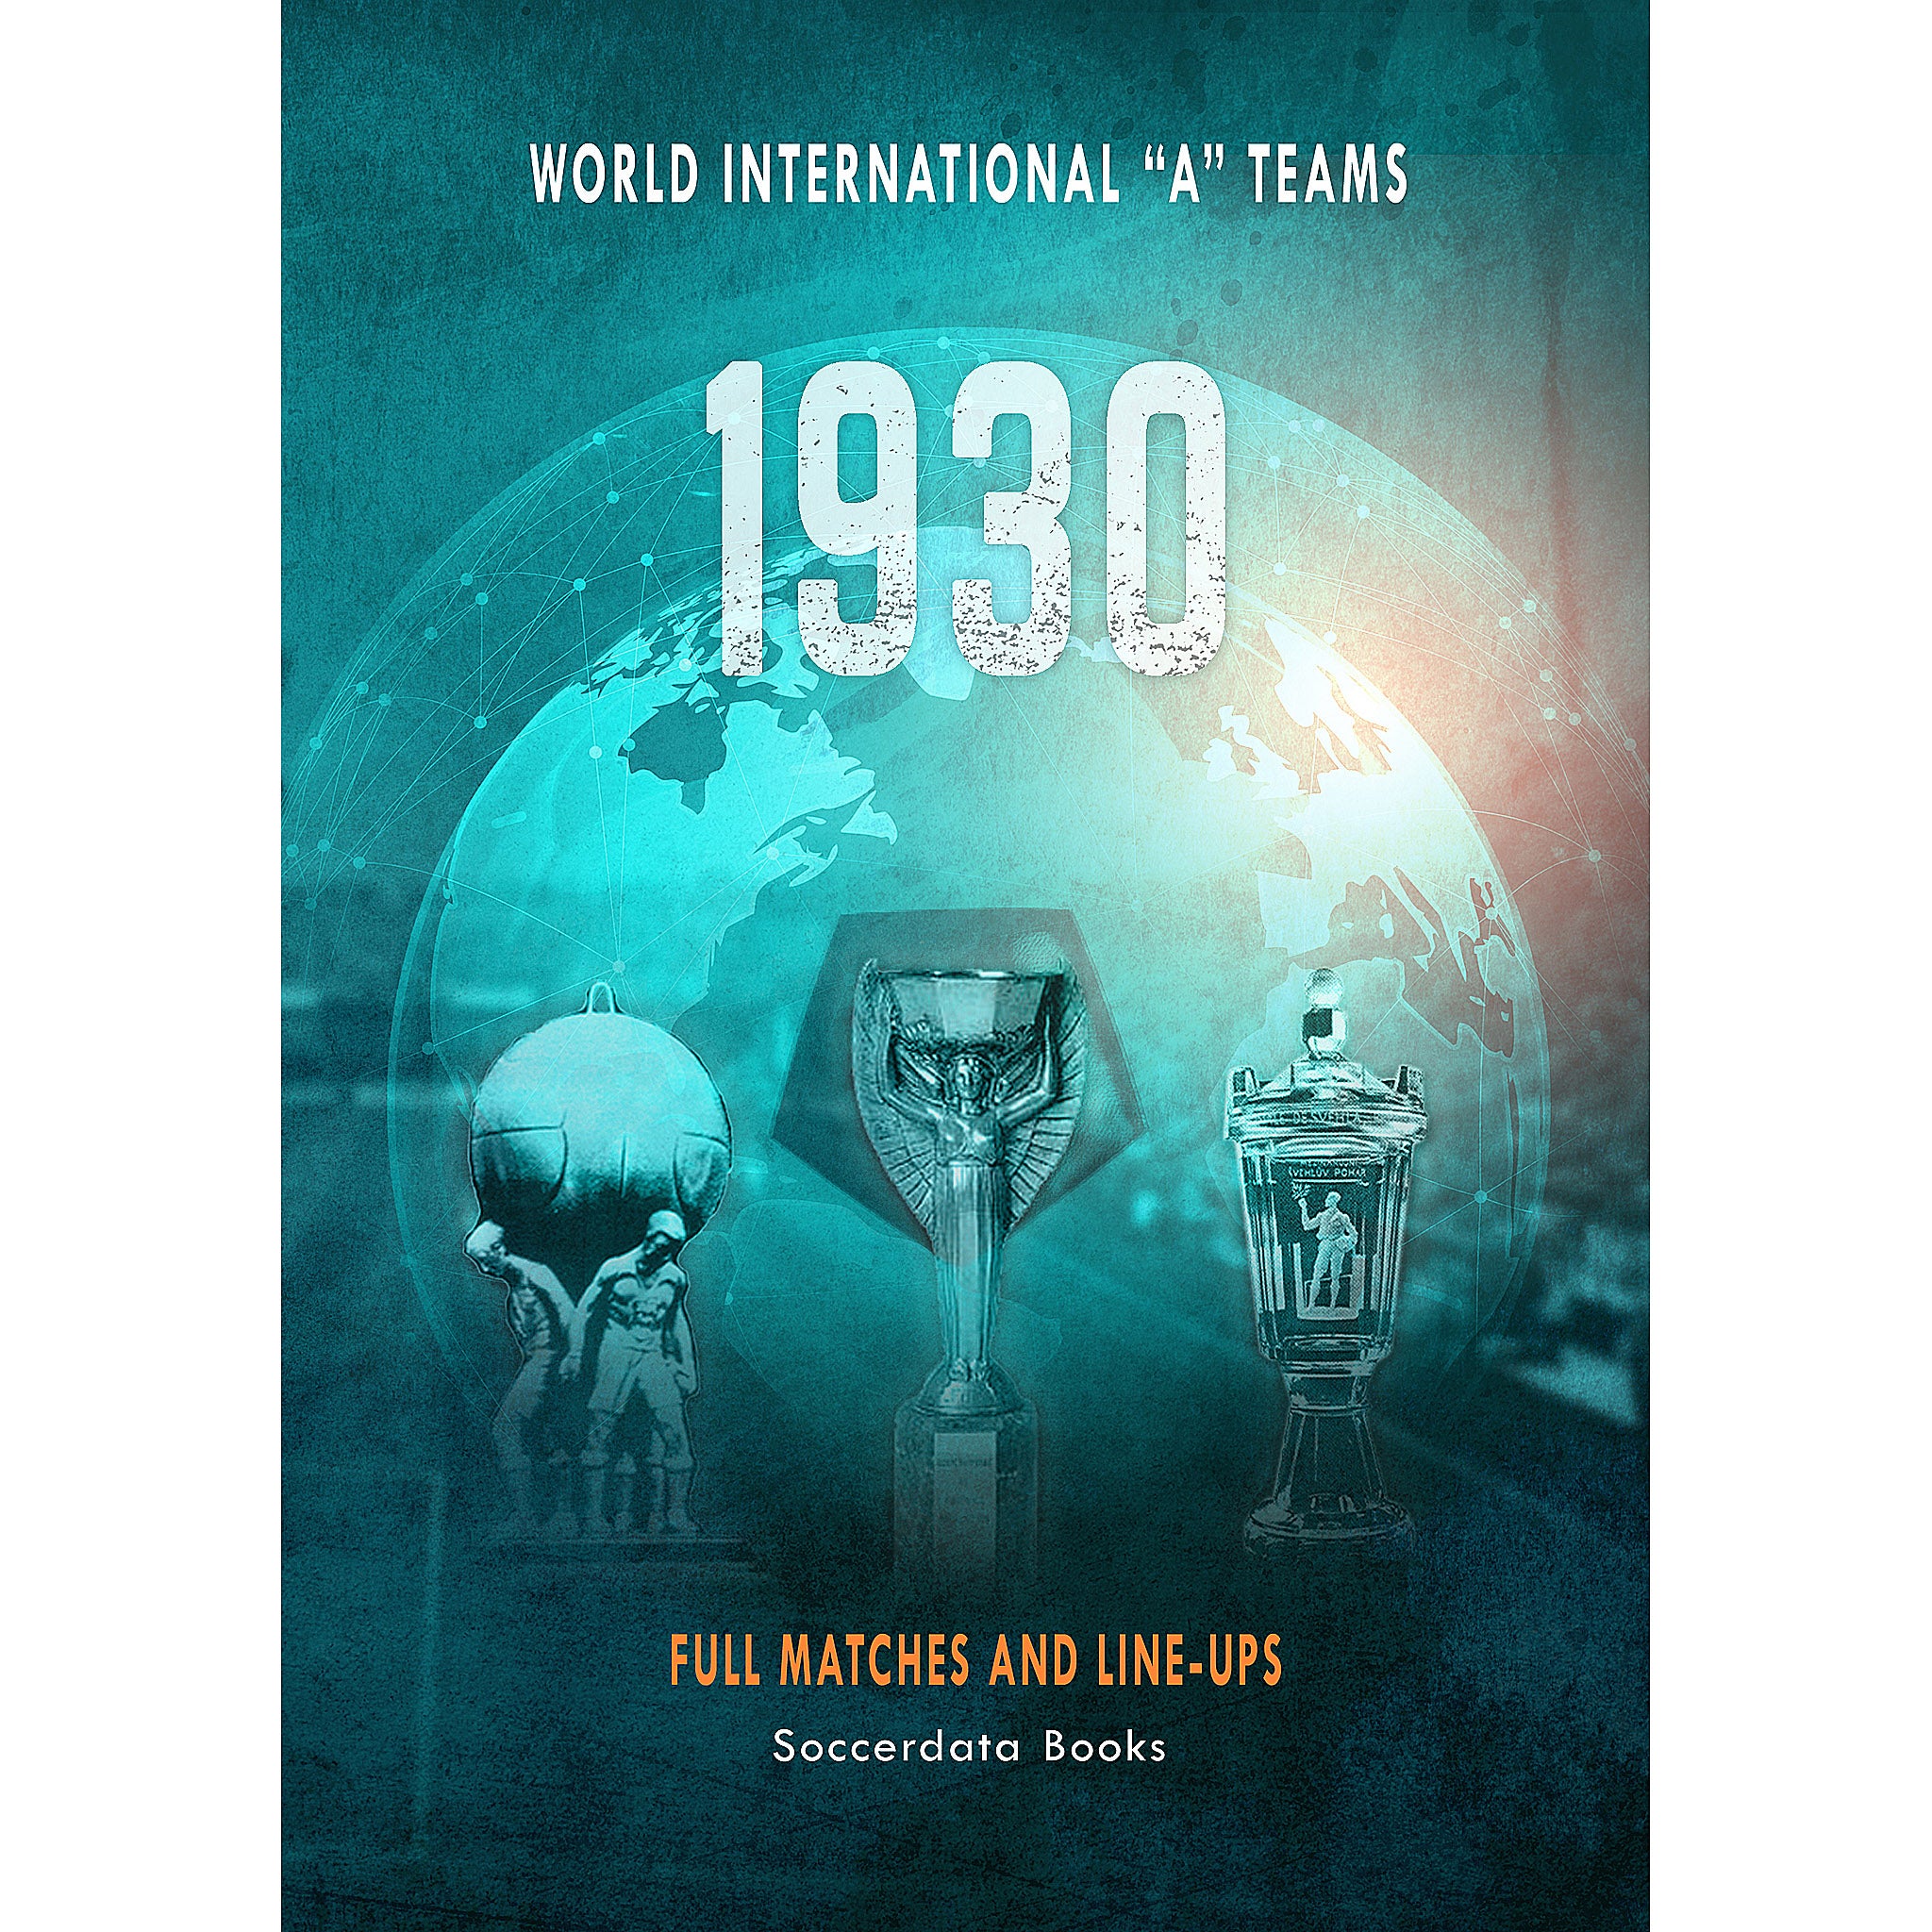 World International "A" Teams 1930 – Full Matches and Line-ups